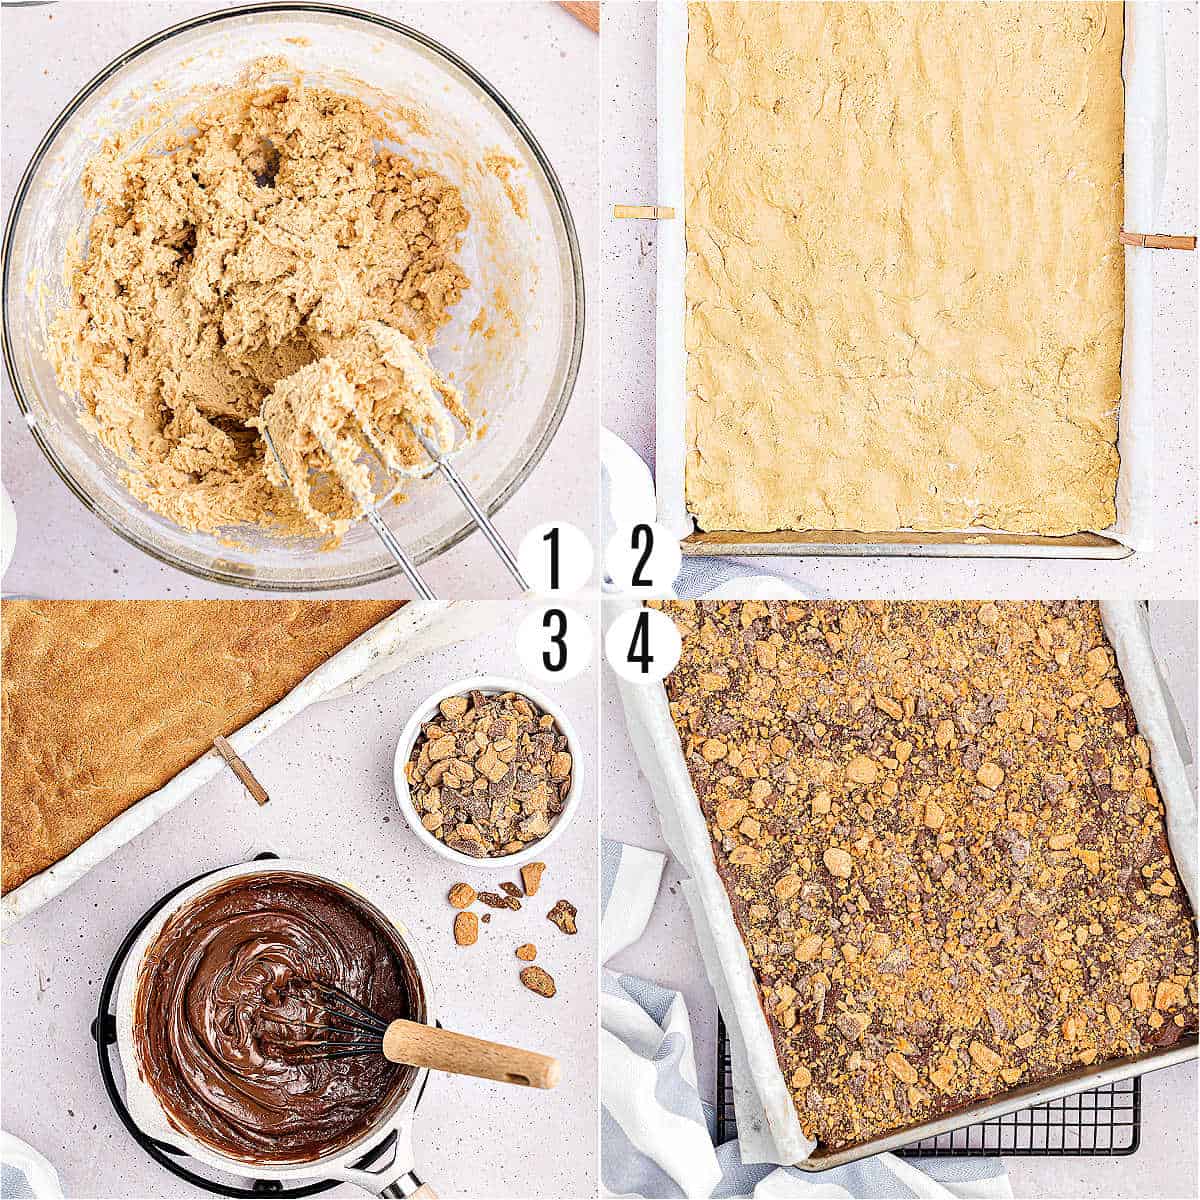 Step by step photos showing how to make butterfinger cookie bars.